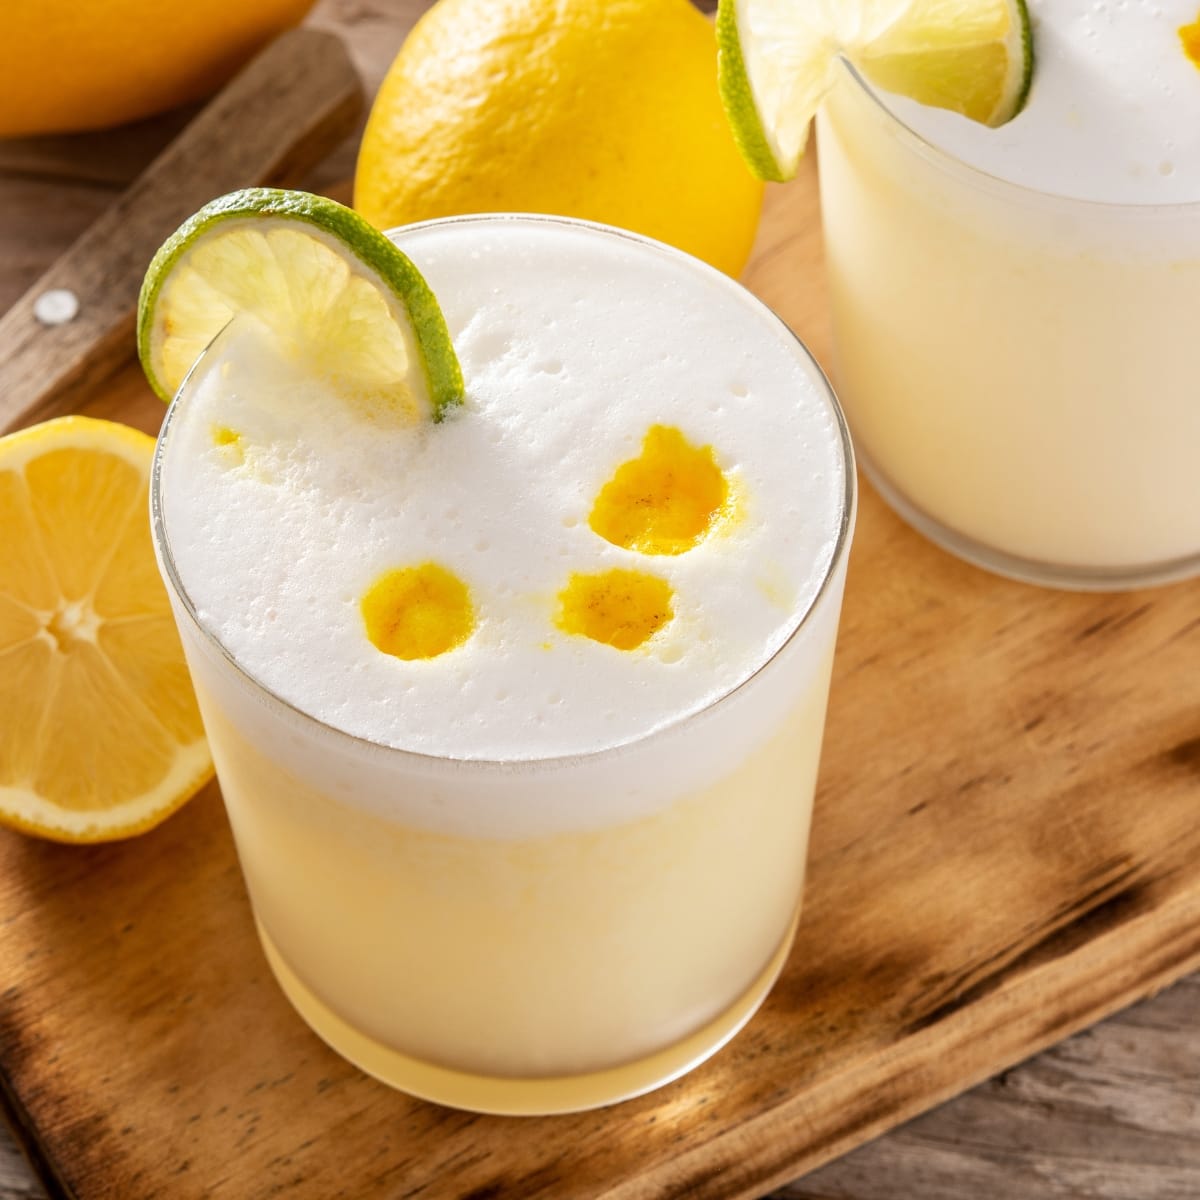 Two Glasses of Pisco Sour Garnished With Slice of Lime Wheel on a Cutting Board with Sliced Lemons